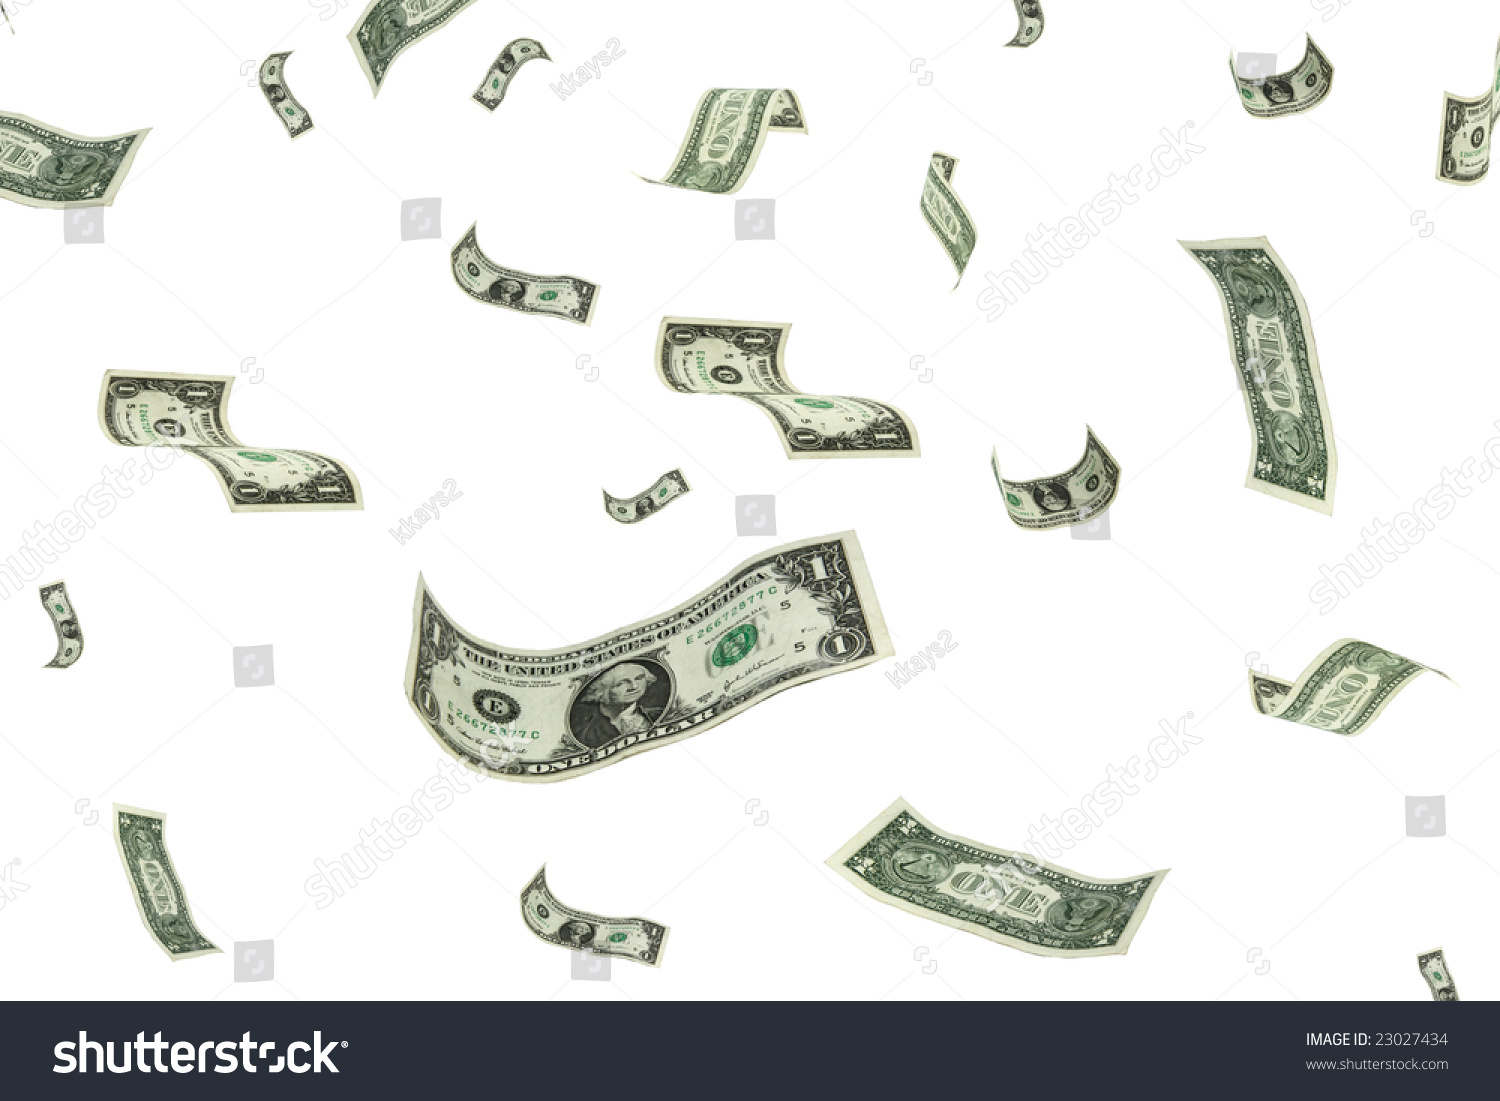 clipart of money falling - photo #28